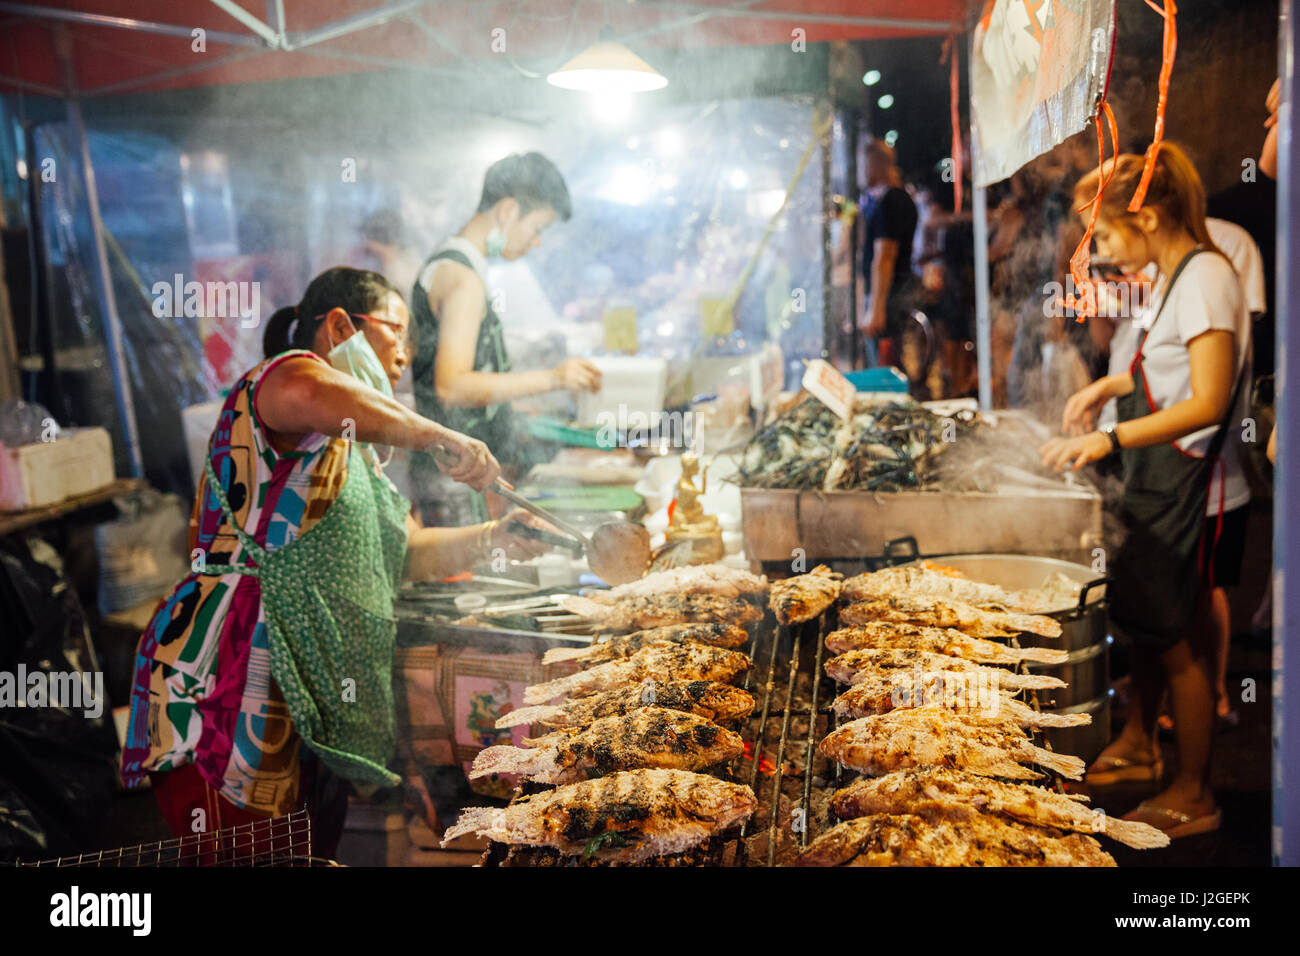 CHIANG MAI, THAILAND - AUGUST 27: Food vendor cooks fish and seafood at the Saturday Night Market (Walking Street) on August 27, 2016 in Chiang Mai, T Stock Photo